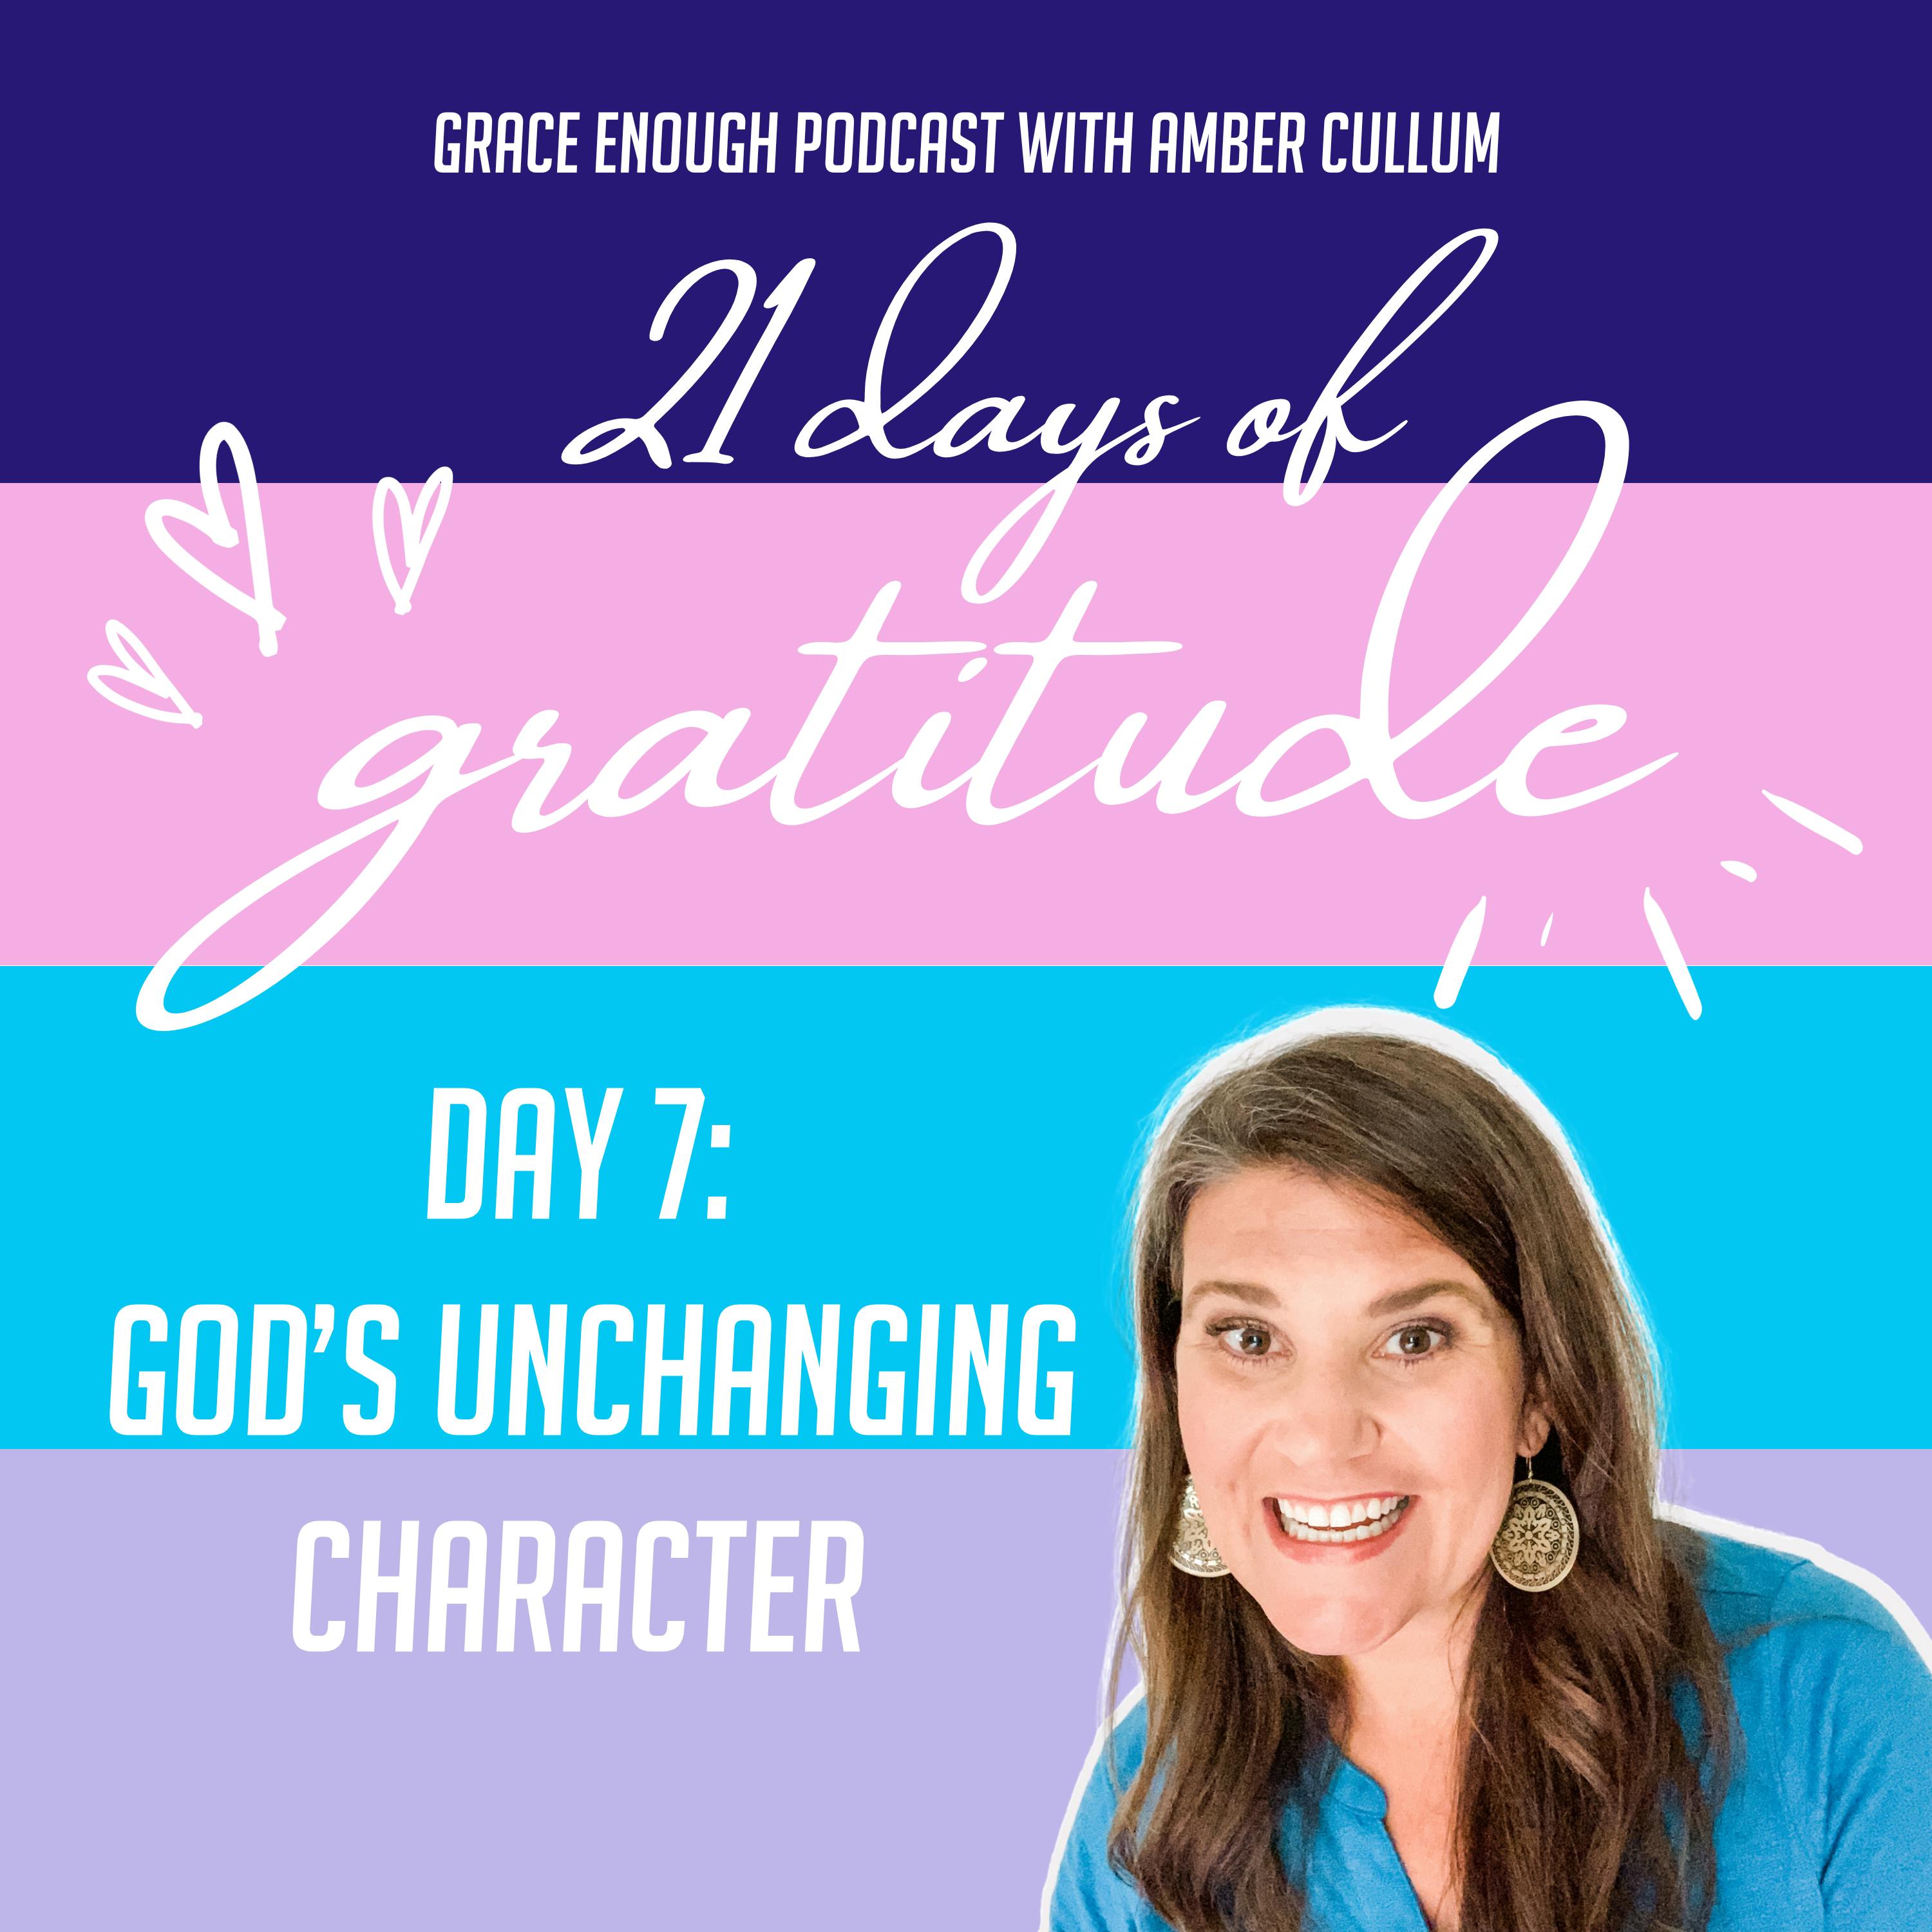 7/21 Days of Gratitude: God's Unchanging Character